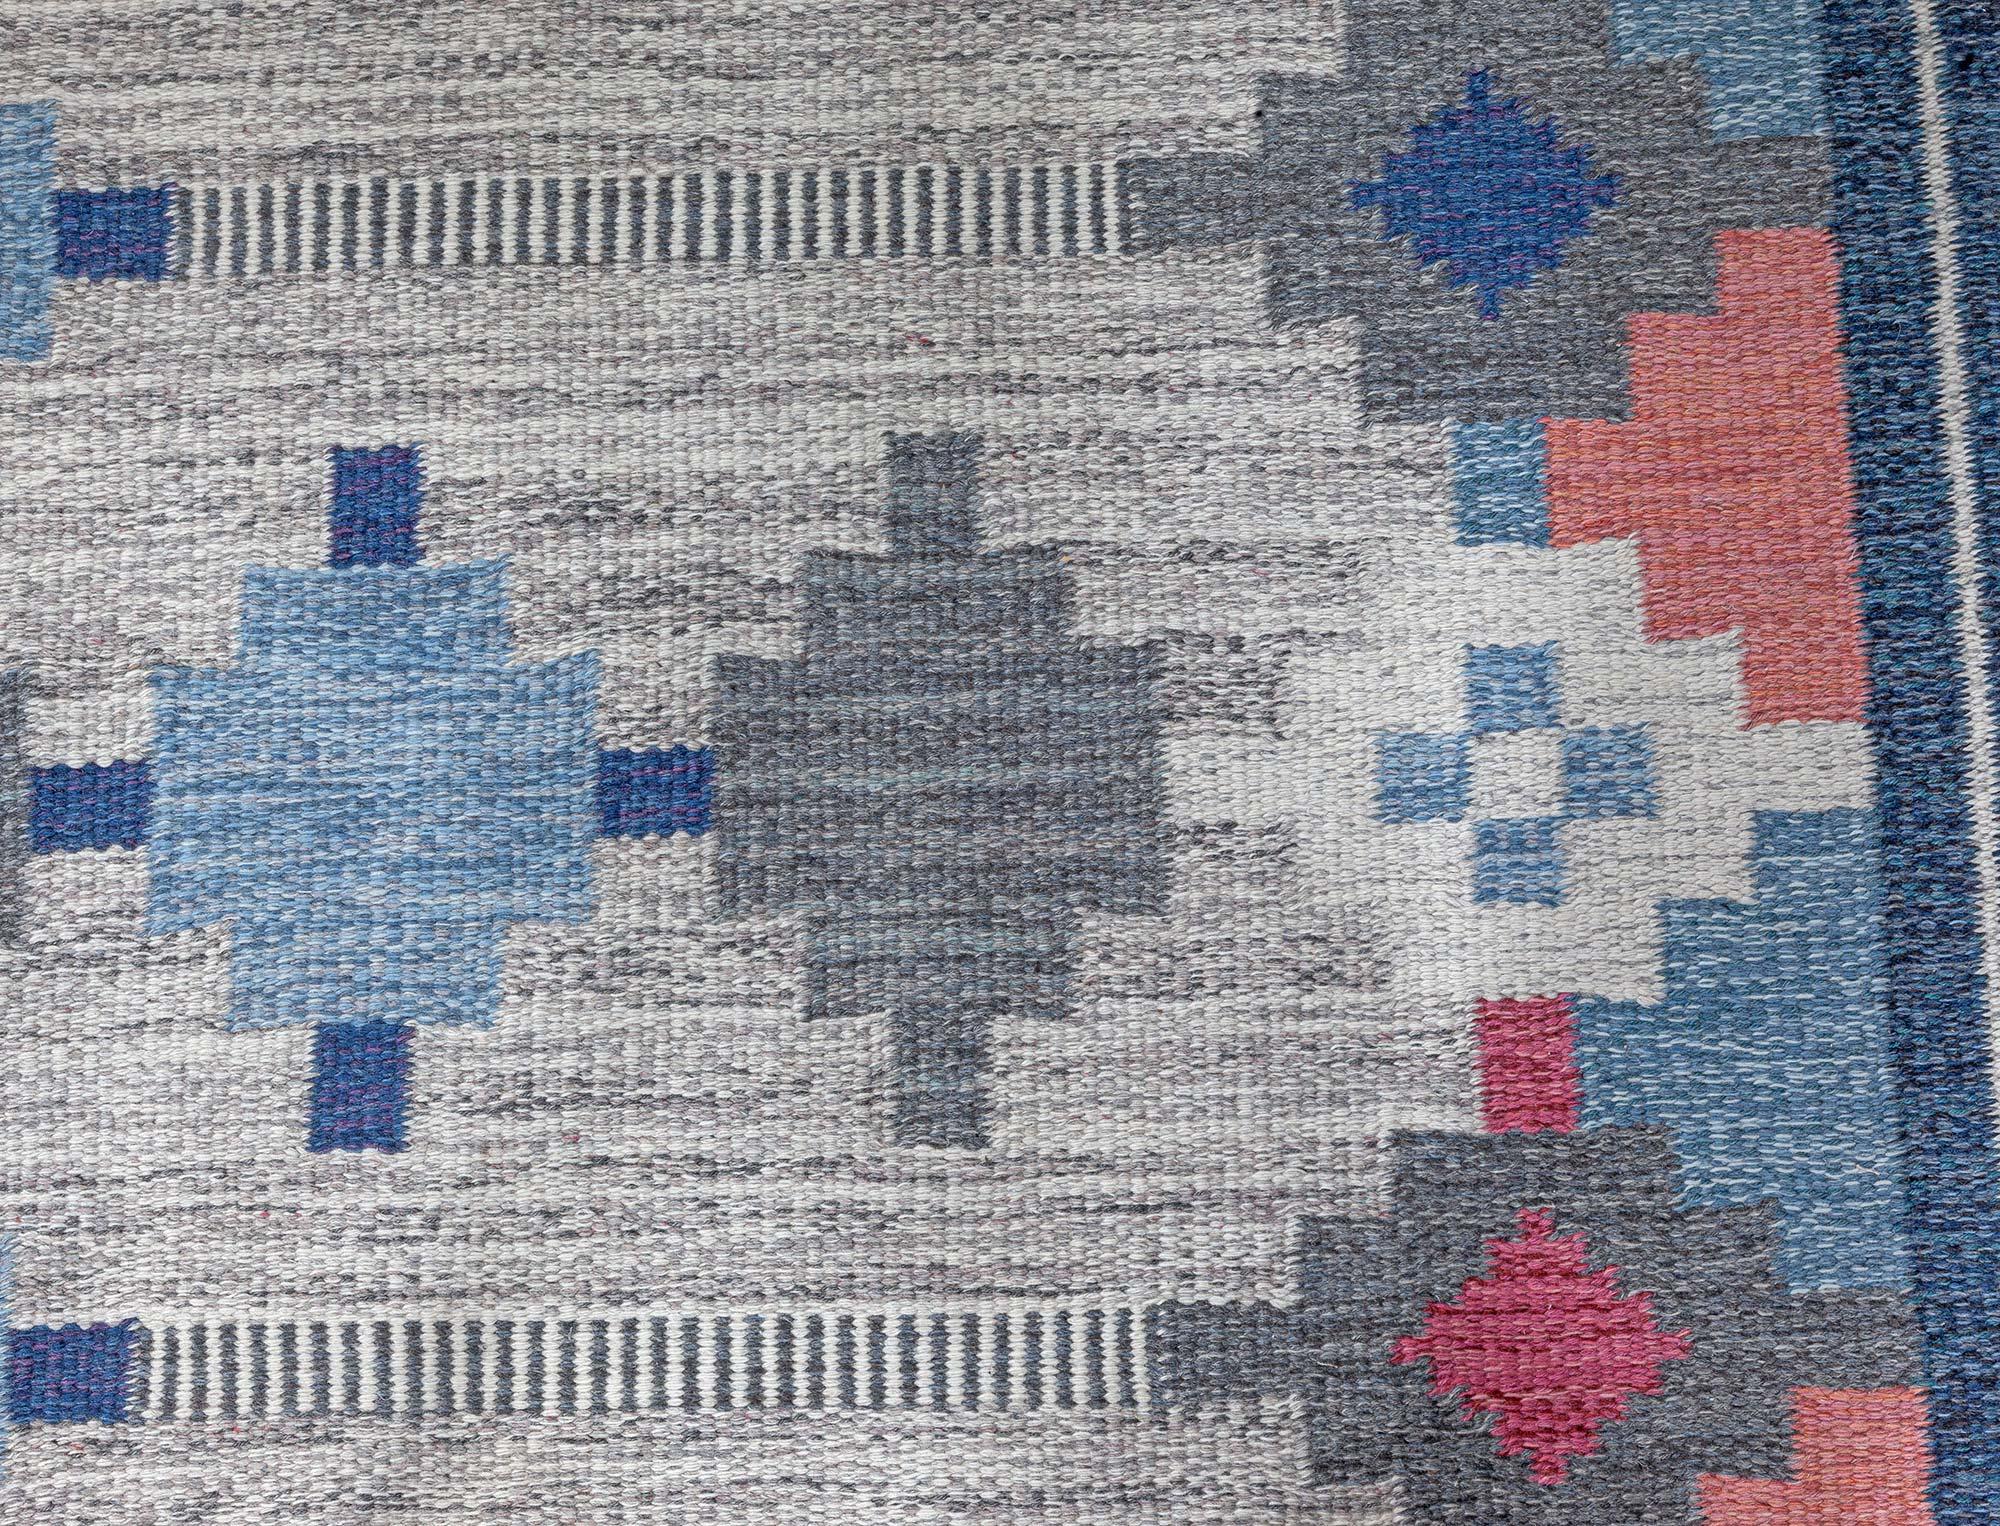 Vintage Swedish flat woven Wool rug by Ulla Parkdahl
Size: 6'5